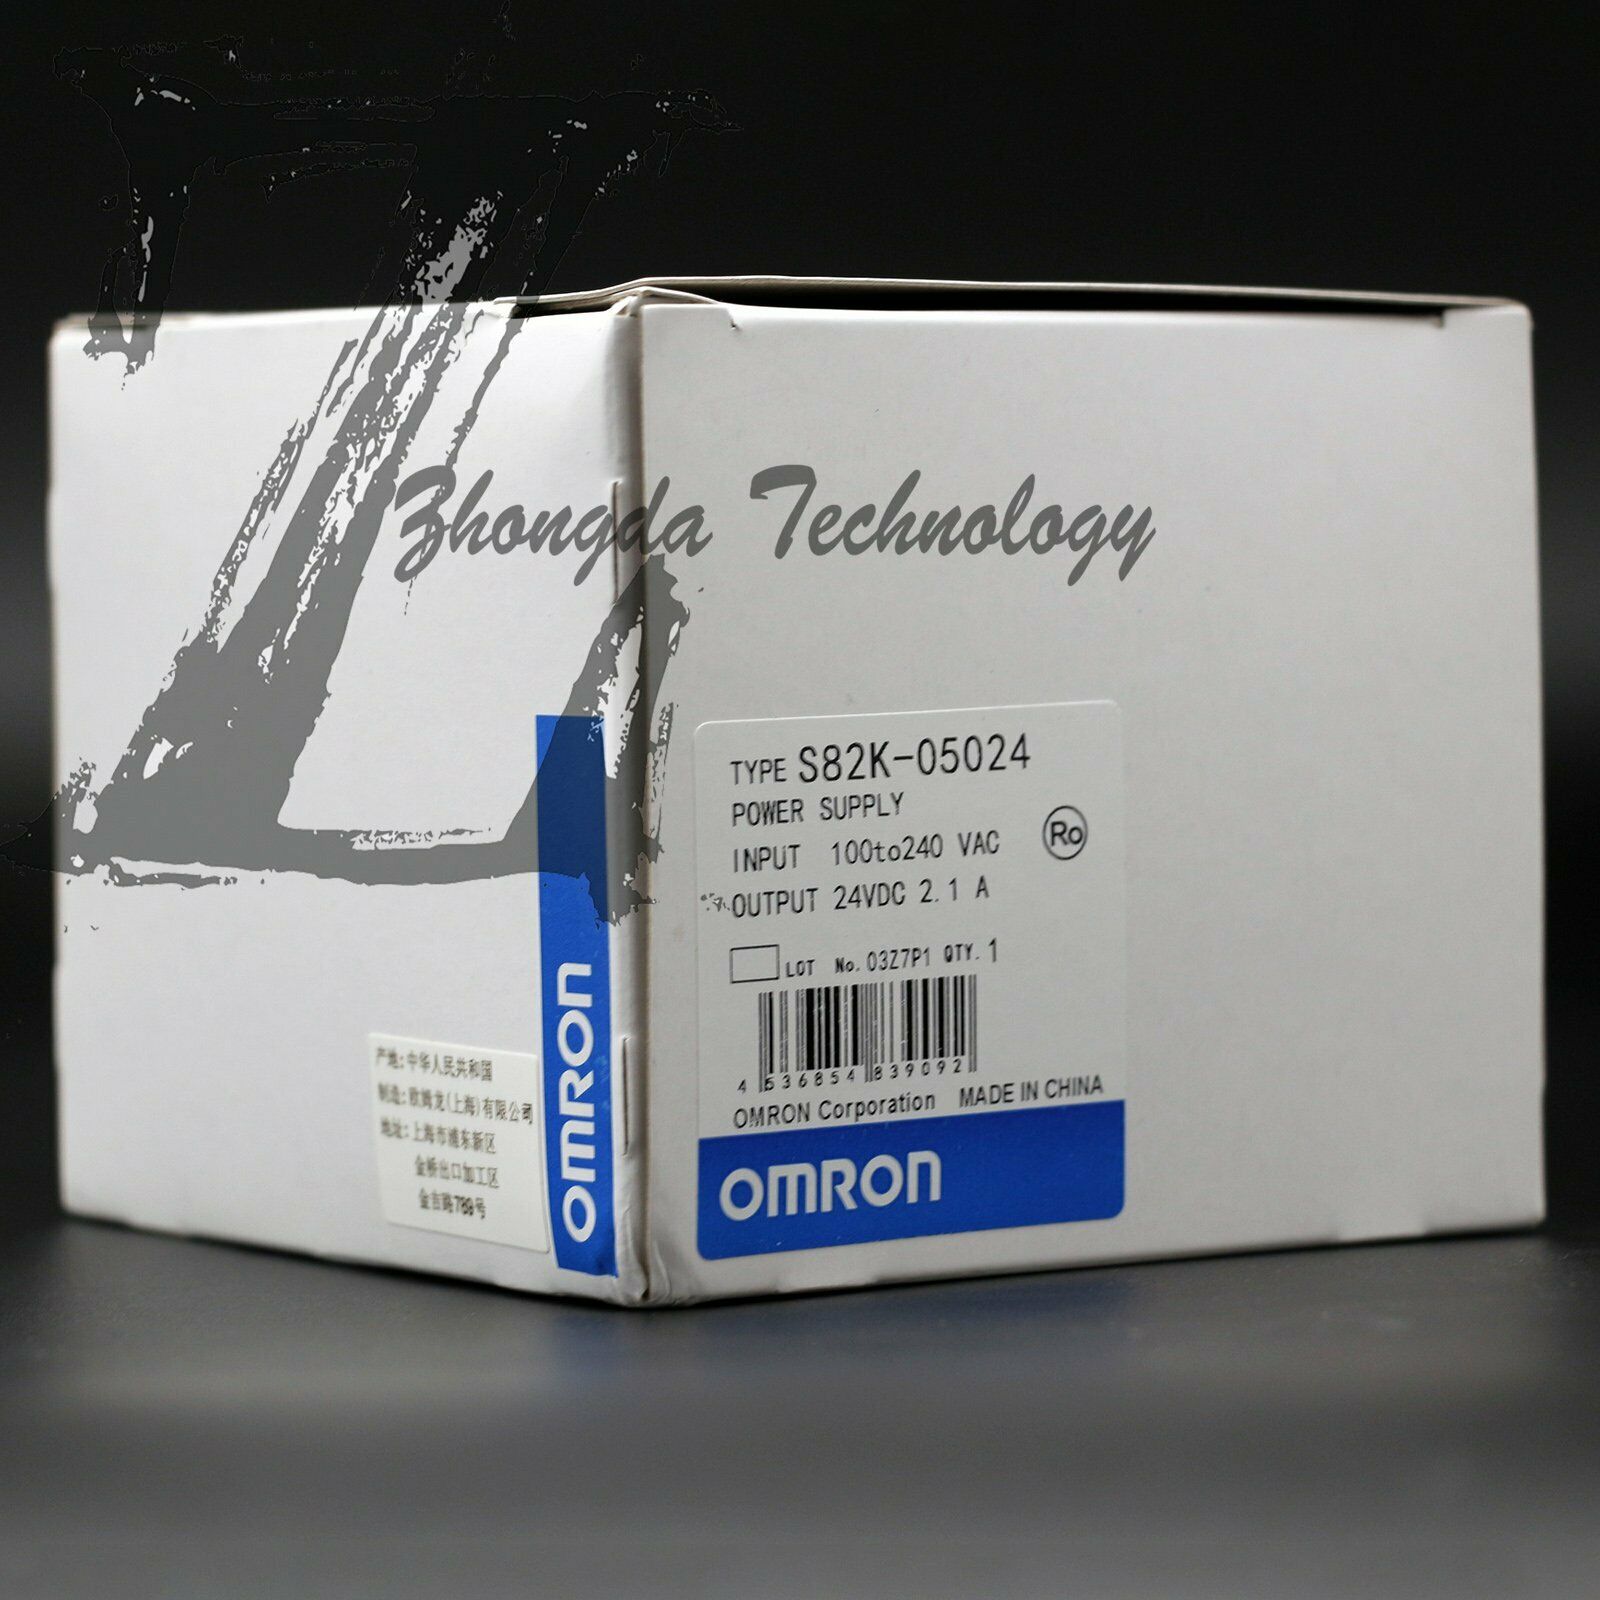 1PC NEW OMRON Switching Power Supply S82K-05024 24VDC One year warranty KOEED $0-100, 90%, import_2020_10_10_031751, OMRON, PLC, S82K